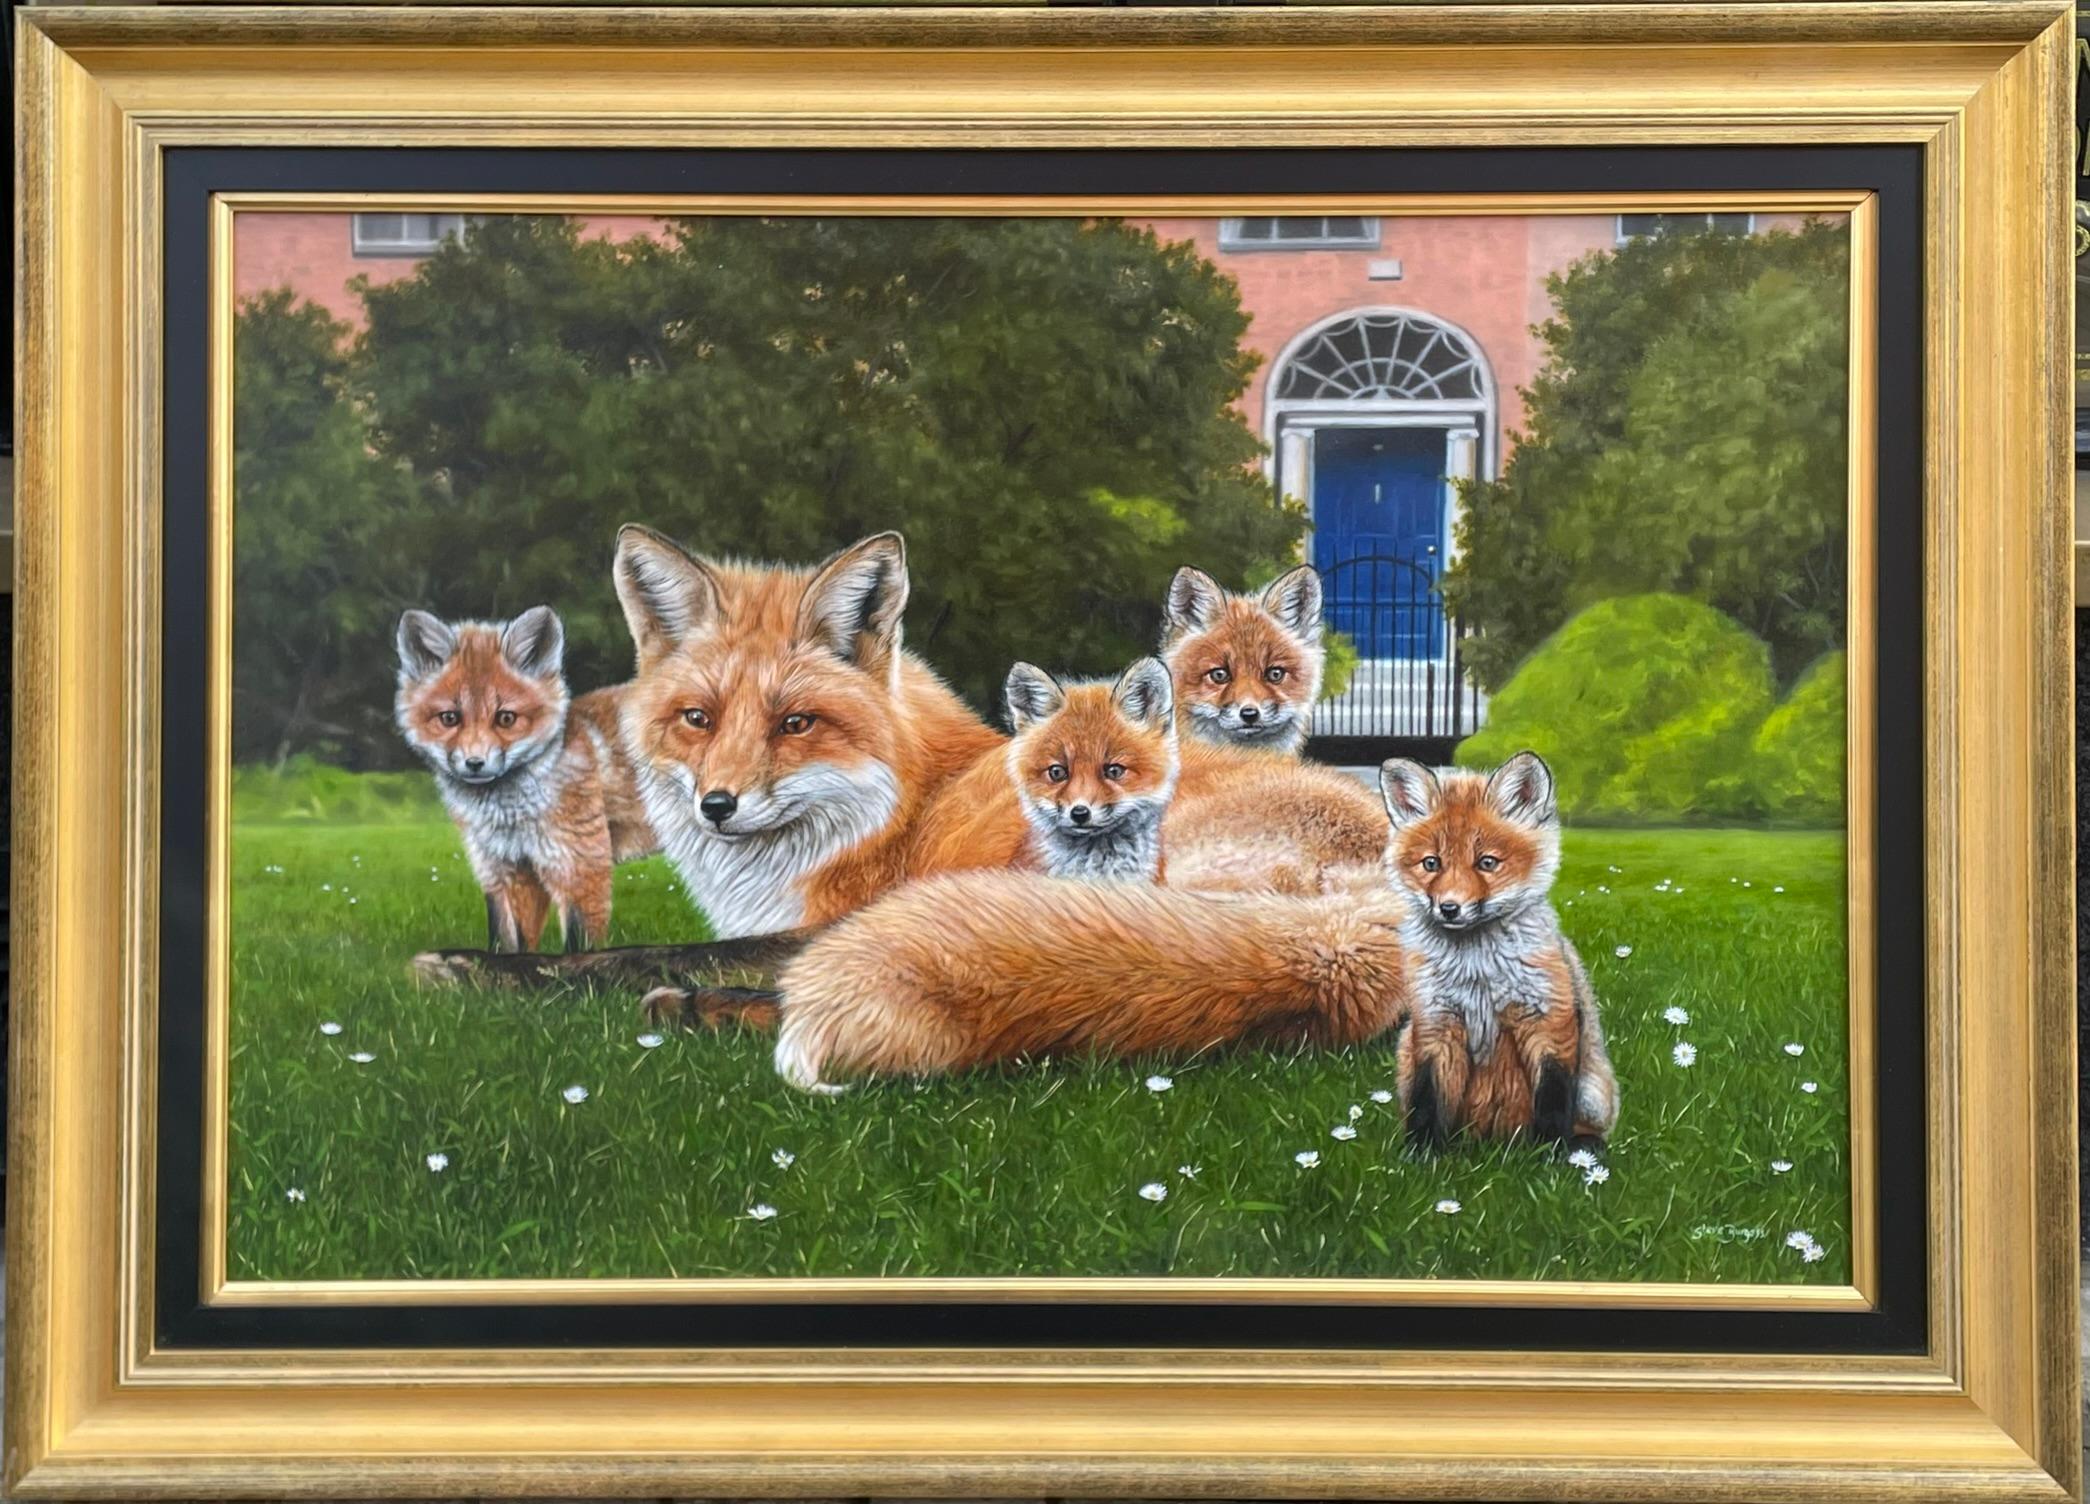 A really magical piece of work which depicts the newest and most talked about residents of Fitzwilliam Square in The Georgian Core of Dublin 2 in Ireland. City Foxes are now common but The Fox Family on Fitzwilliam are very fortunate with their